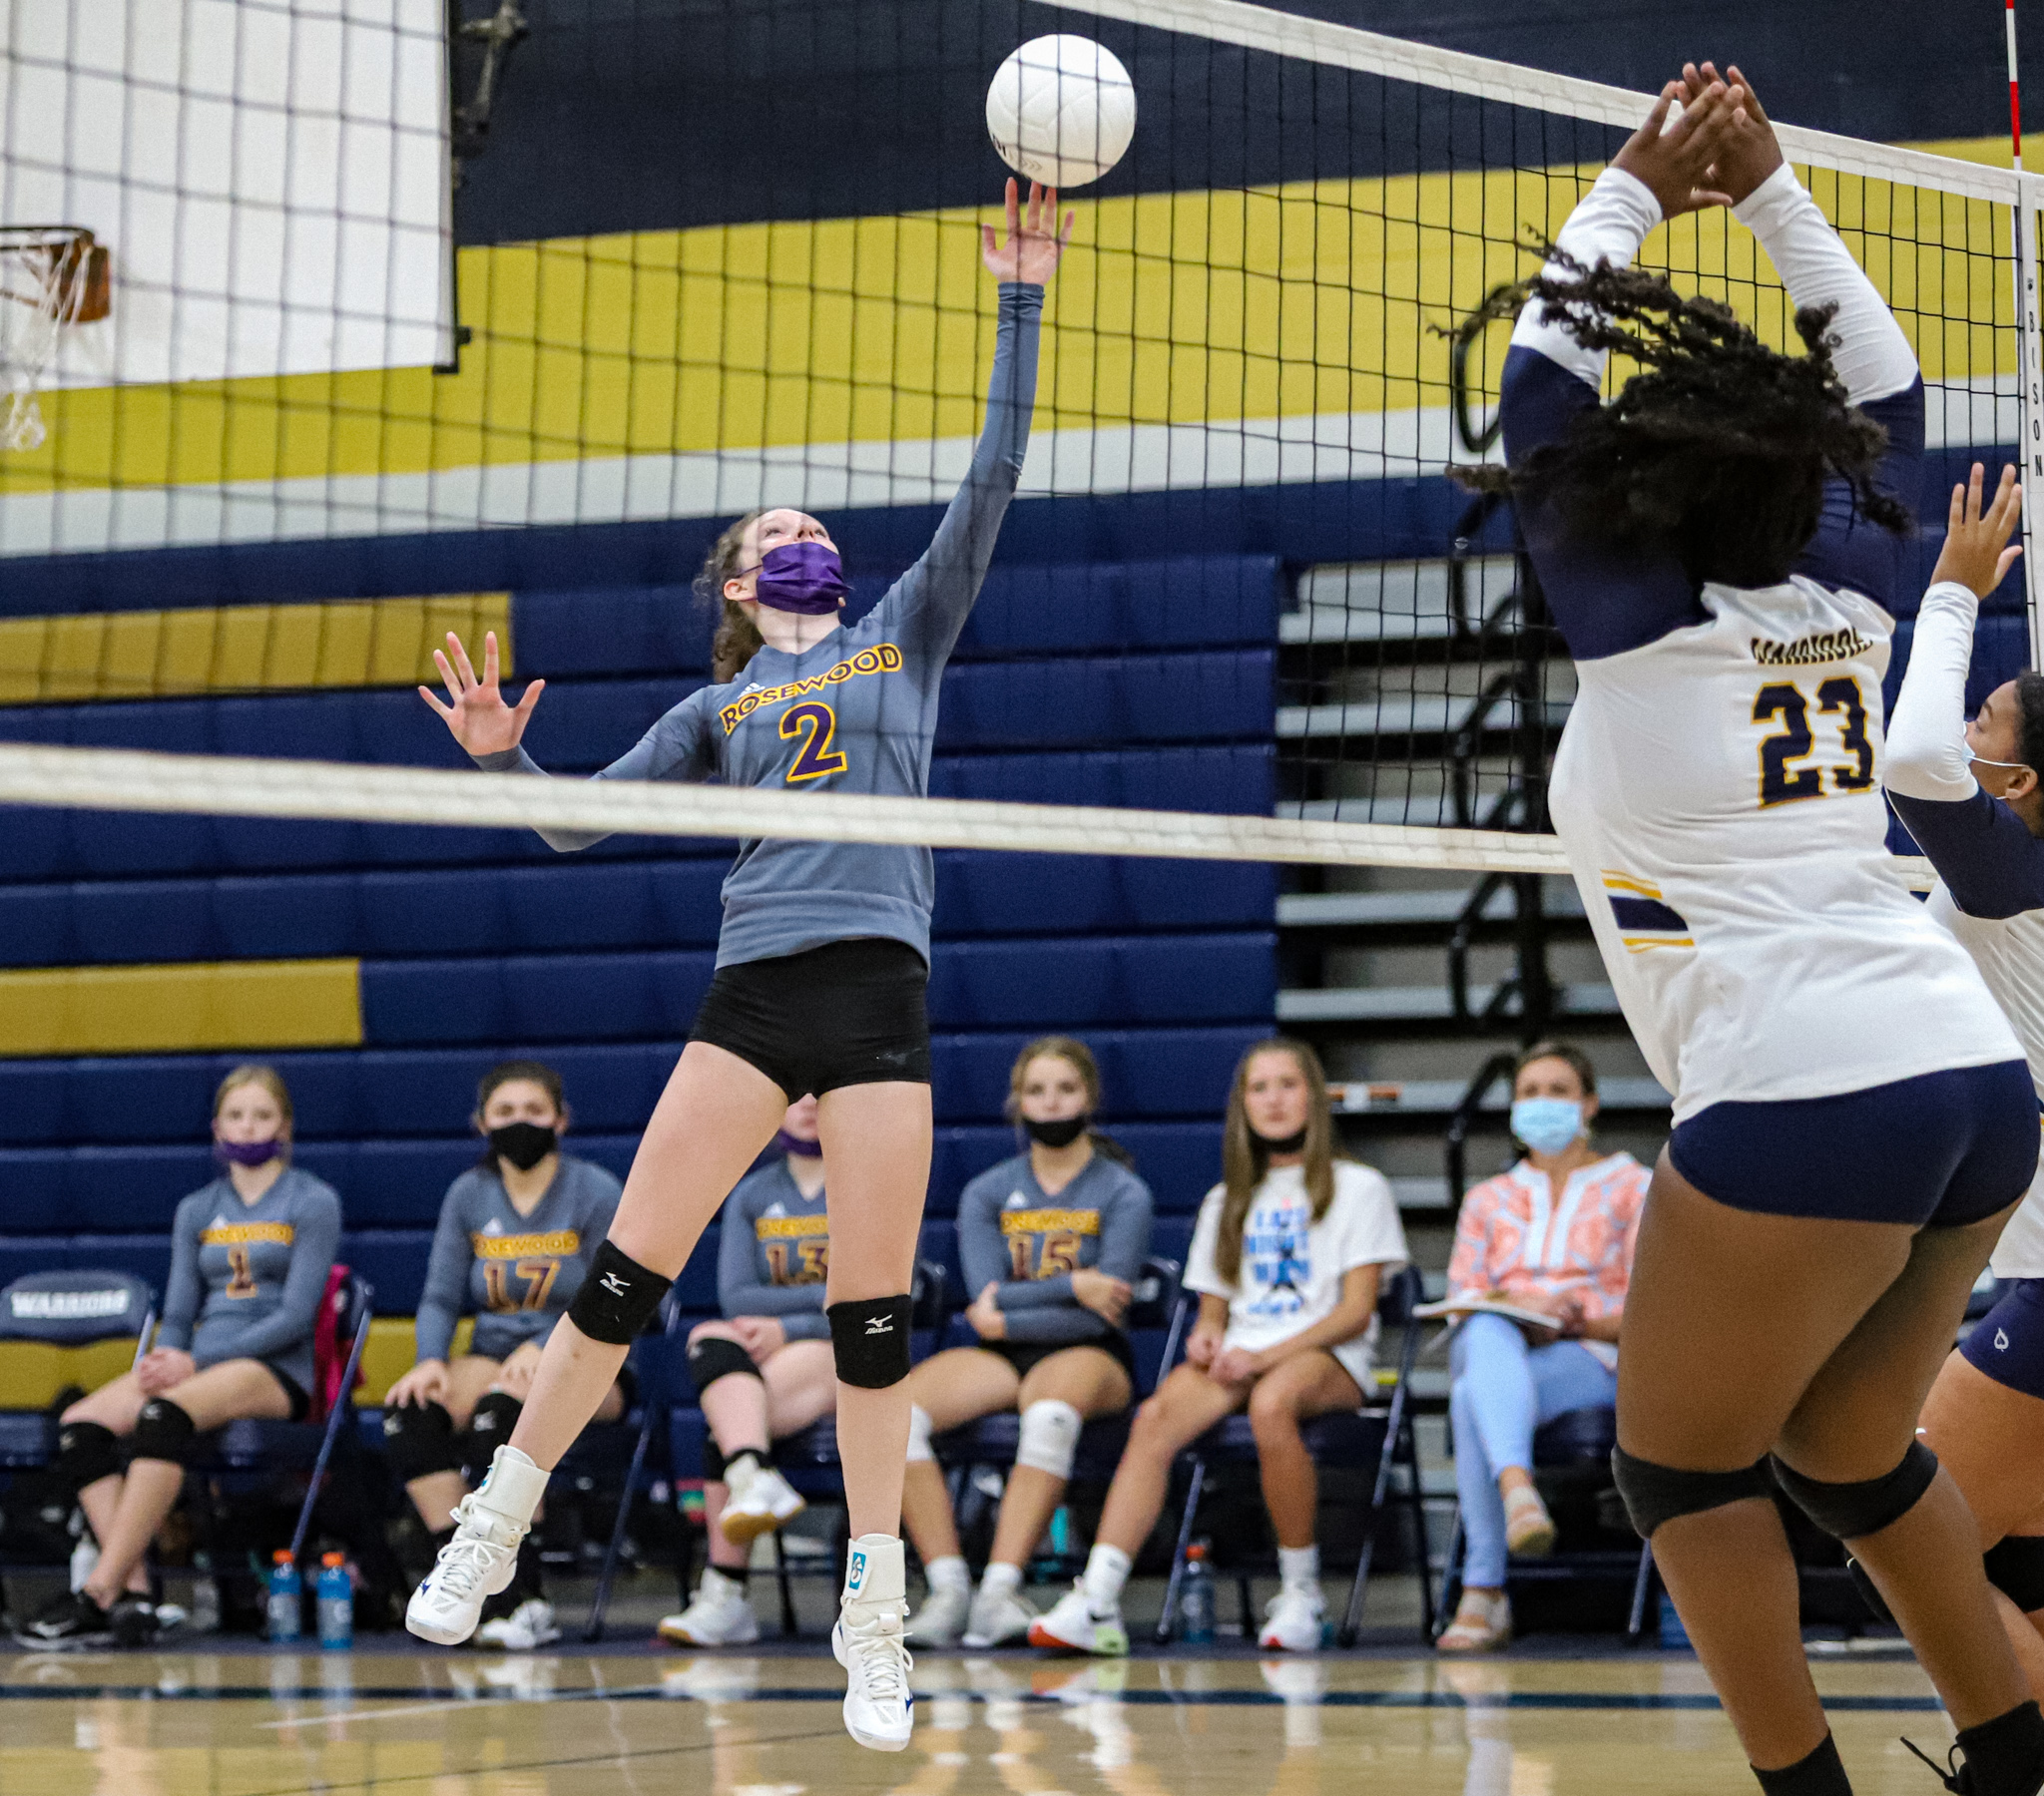 Volleyball: Rosewood Earns Four-set Win Over Eastern Wayne (PHOTO GALLERY)